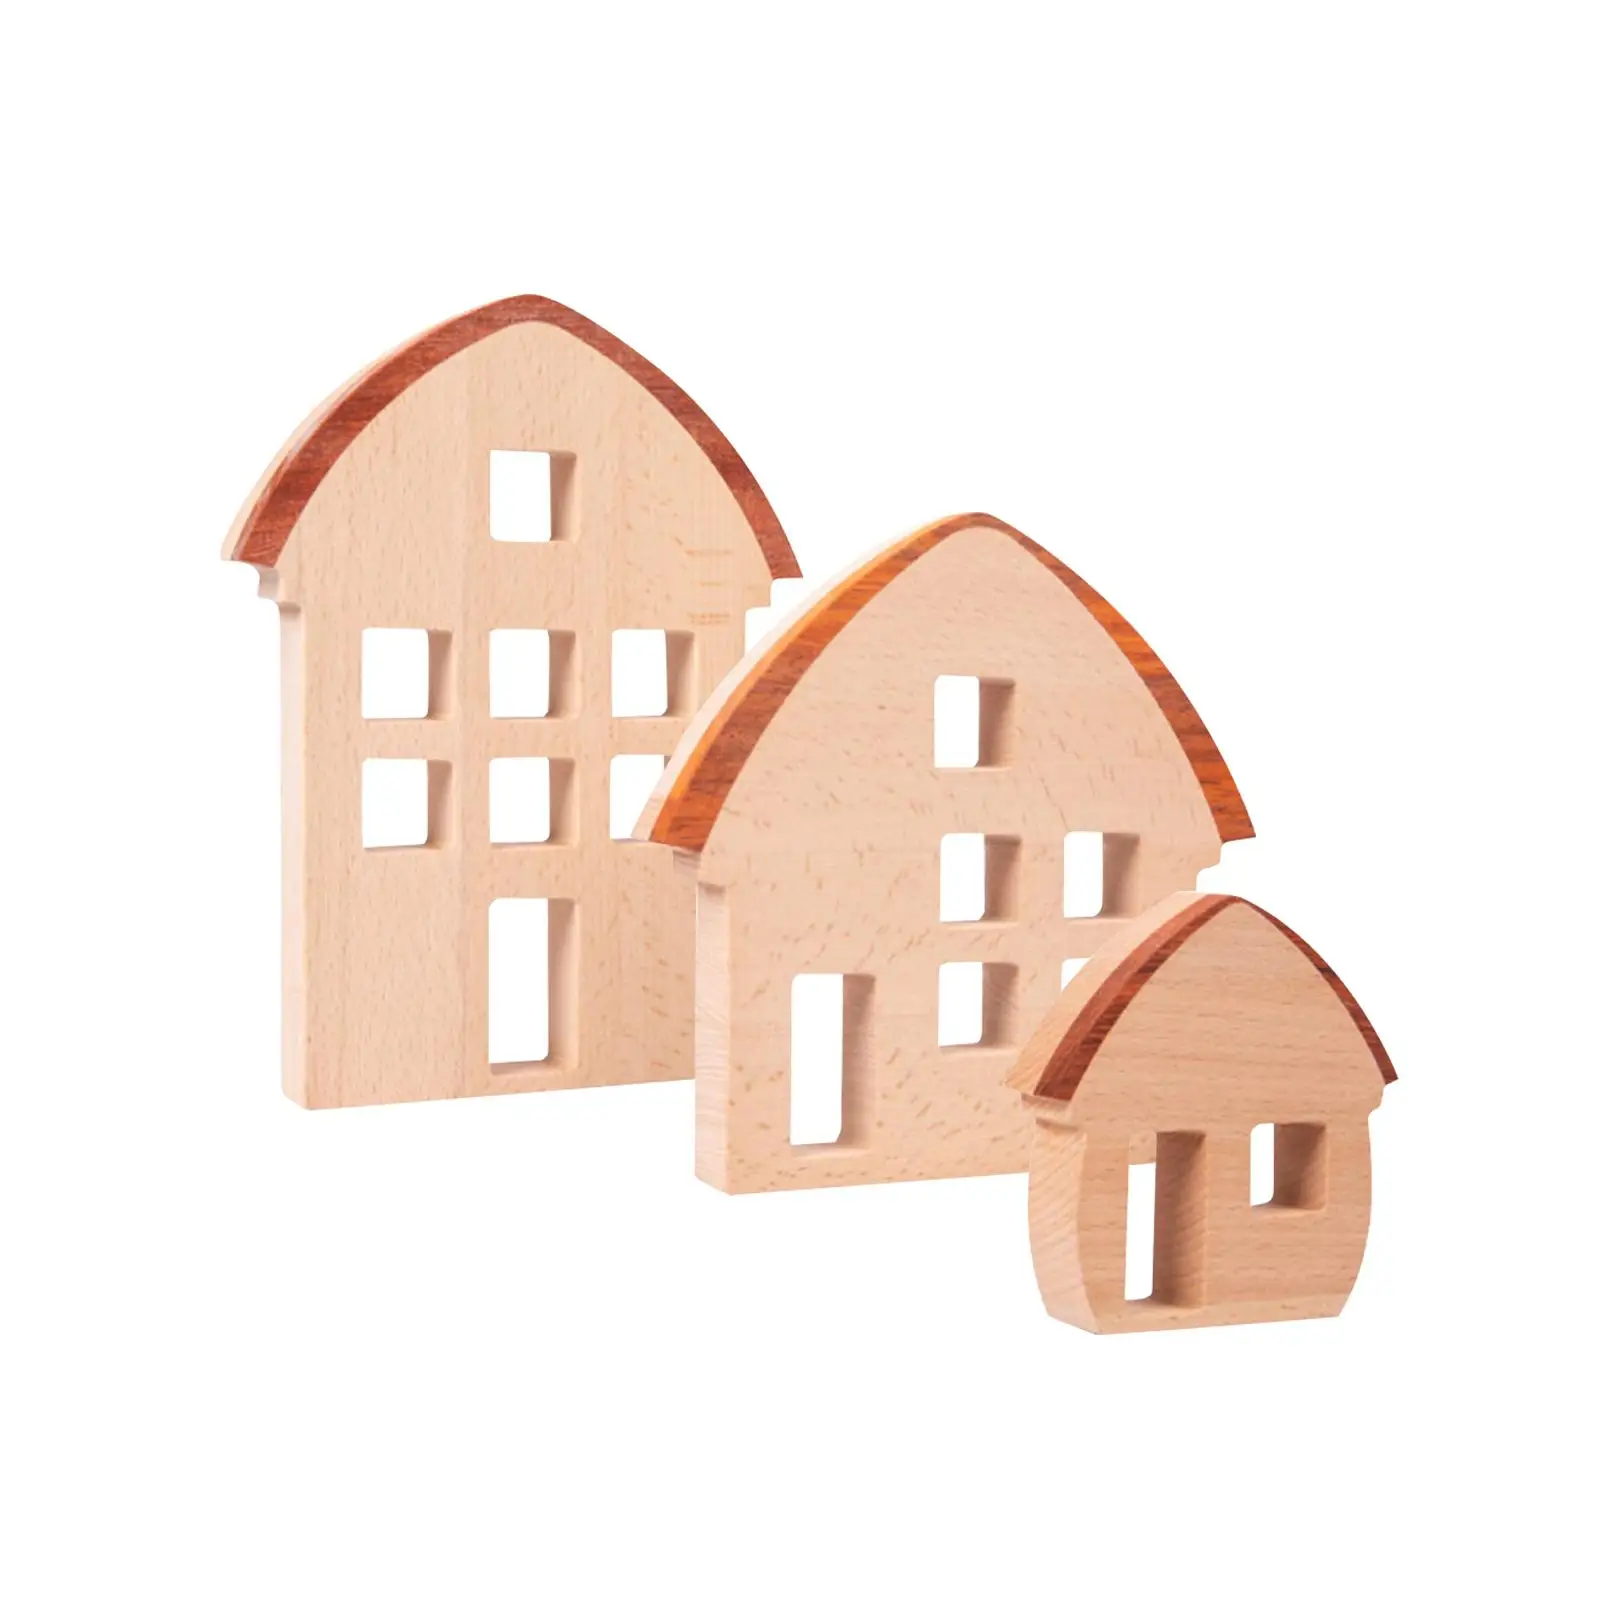 3 Pieces Wood House Birthday Gift Centerpiece for Boys Girls Ages 3-6 Home